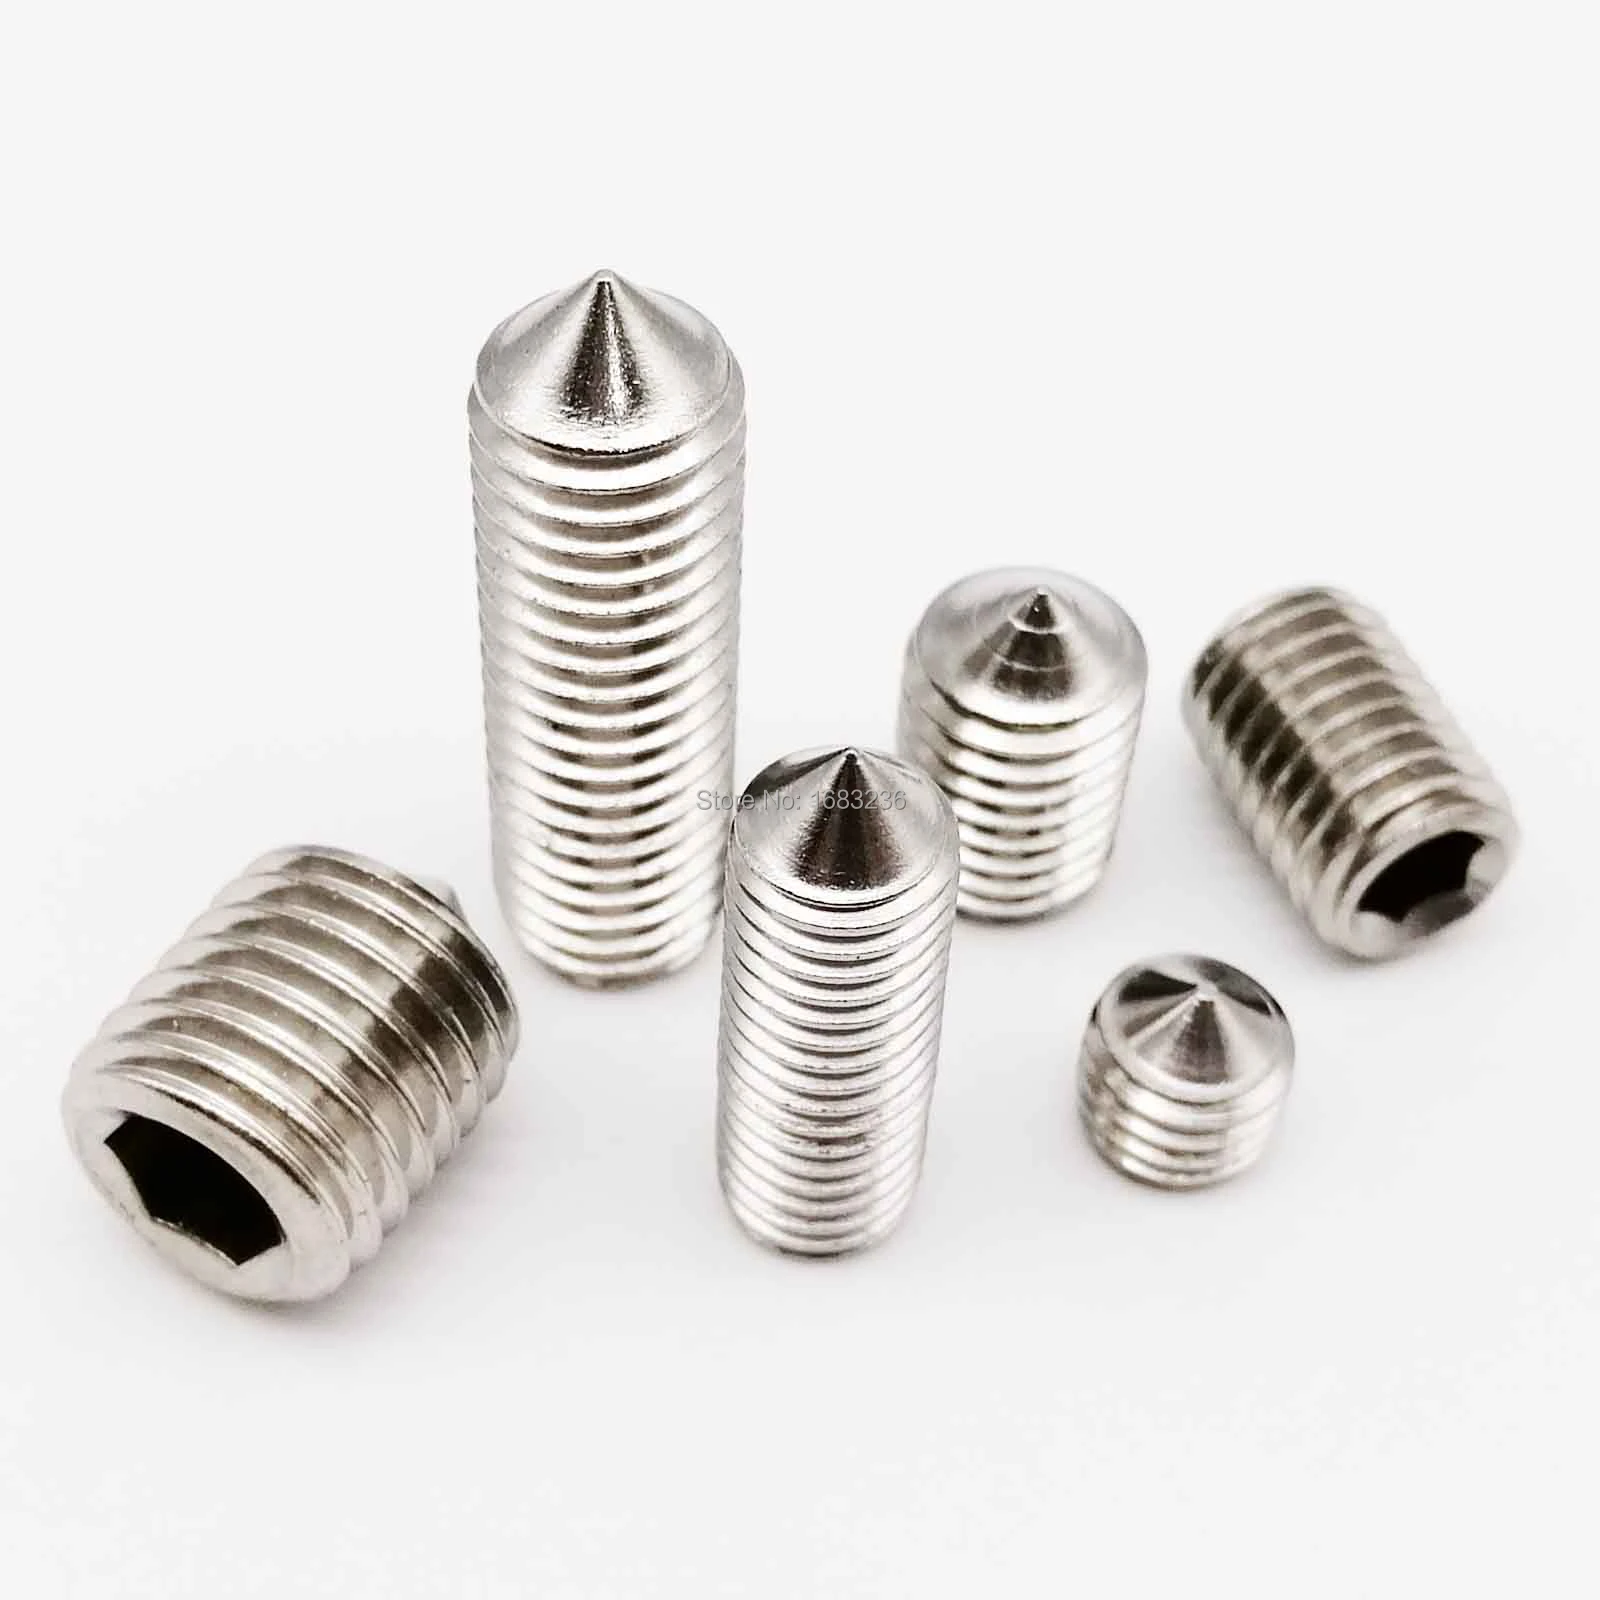 8mm A2 STAINLESS STEEL CONE POINT GRUB SCREWS HEX SOCKET SET SCREW DIN914 10pcs M8 